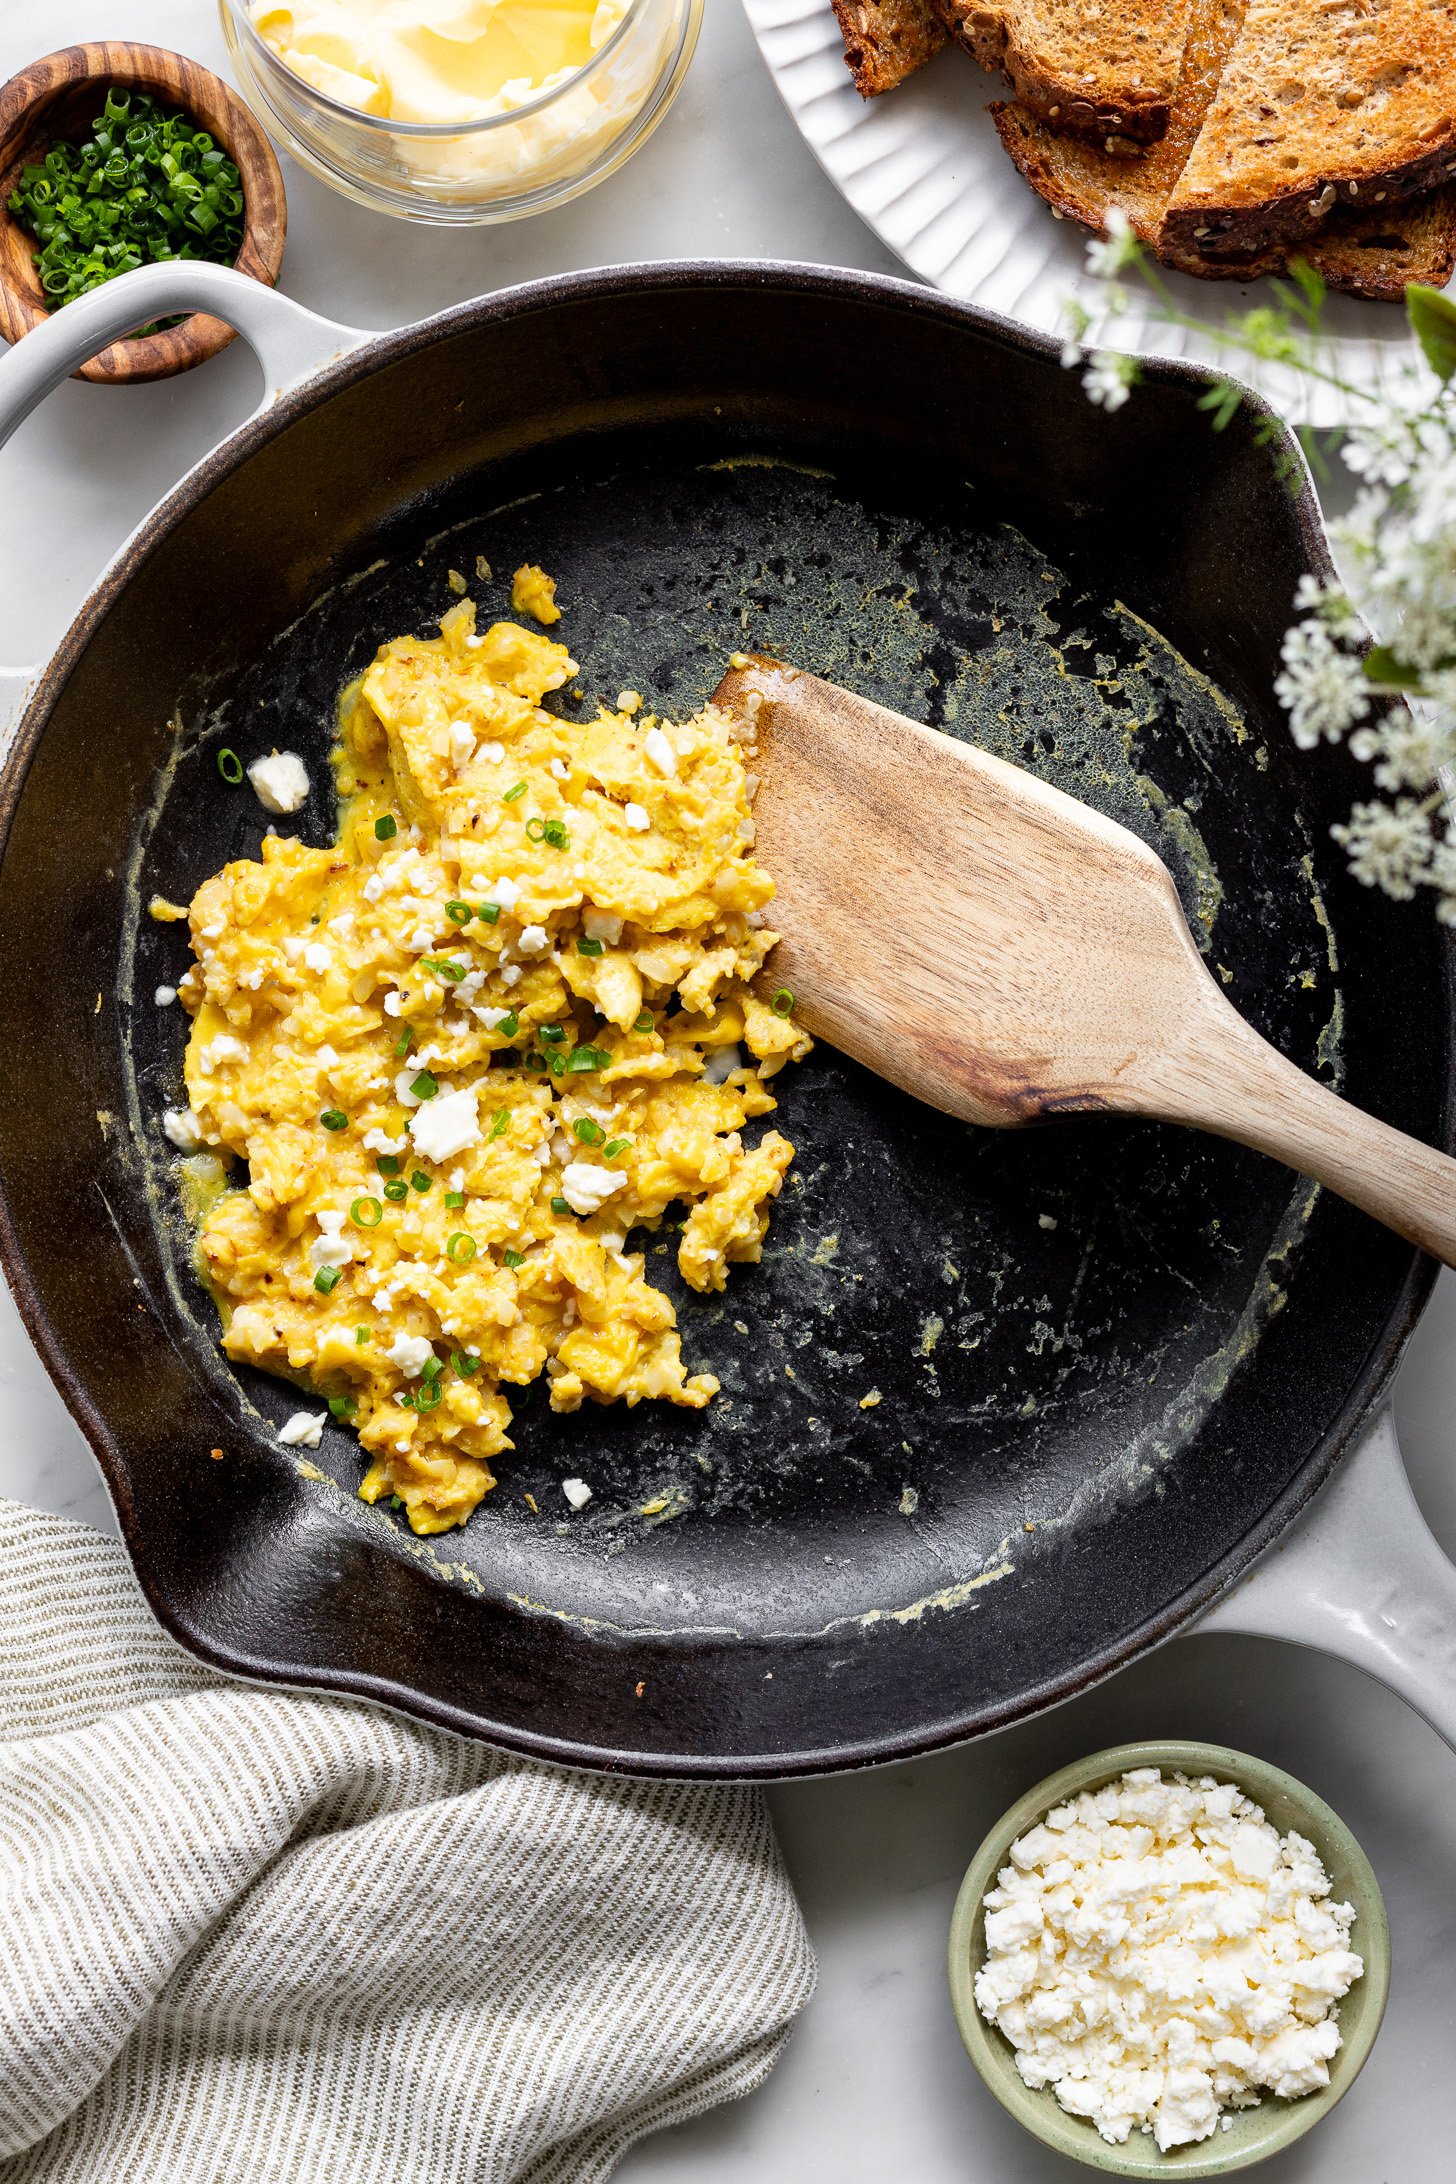 A wooden spatula is stirring cooked scrambled eggs with cauliflower rice in a cast iron pan. There is crumbled feta and chopped chives on top of the eggs. The pan is sitting on a table. There is a napkin next to the pan on the table. There are small bowls of crumbled feta, chopped chives, a glass container with butter, a plate with toast, and a vase with flowers slightly surrounding the plate, slighlty out of frame.